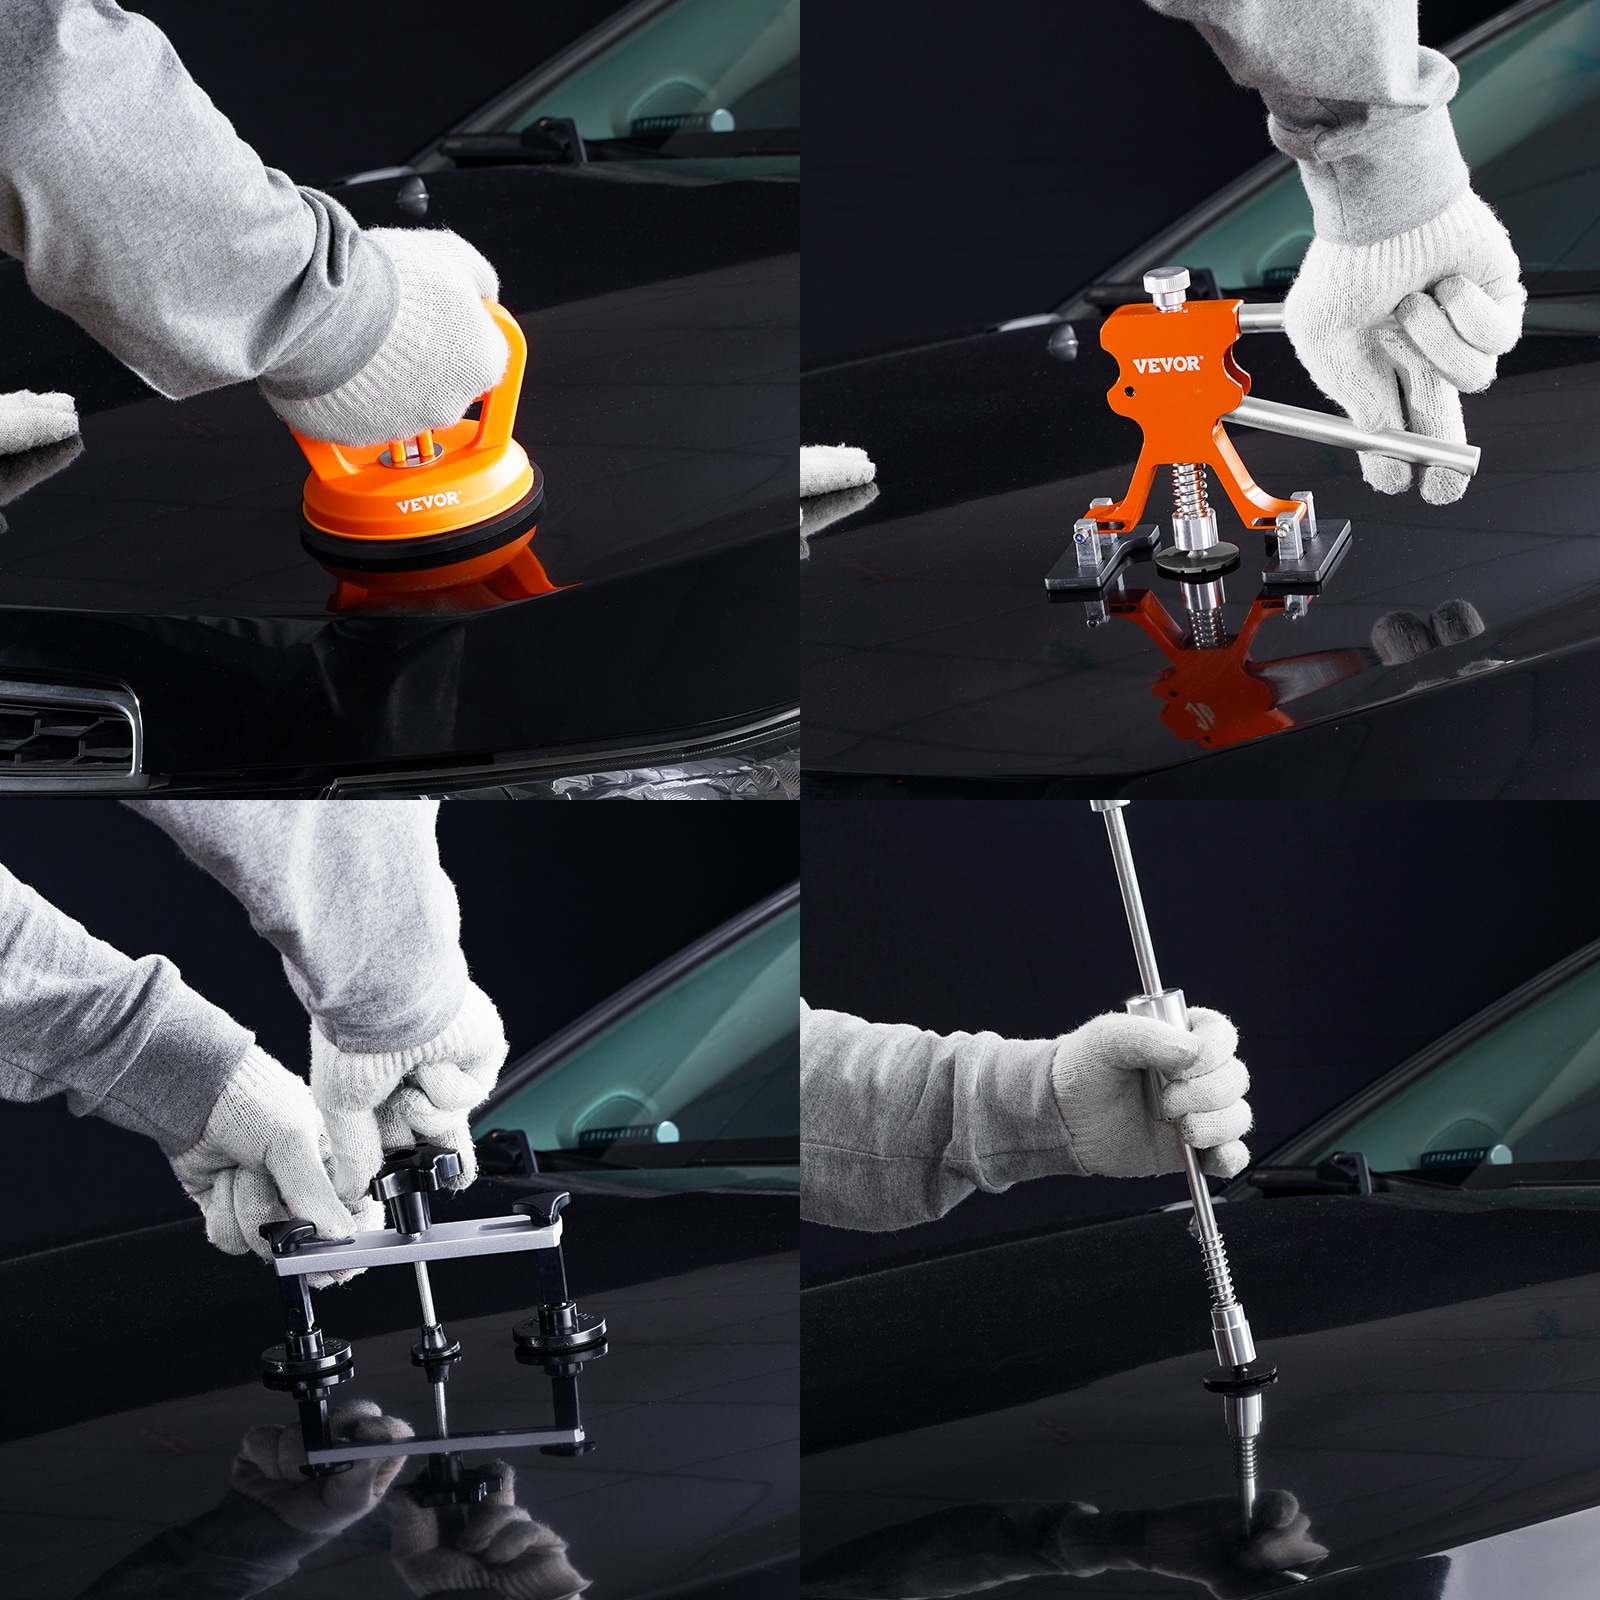 Car Dent Repair Tools, Dent Puller With Suction Cup, Dent Removal Kit